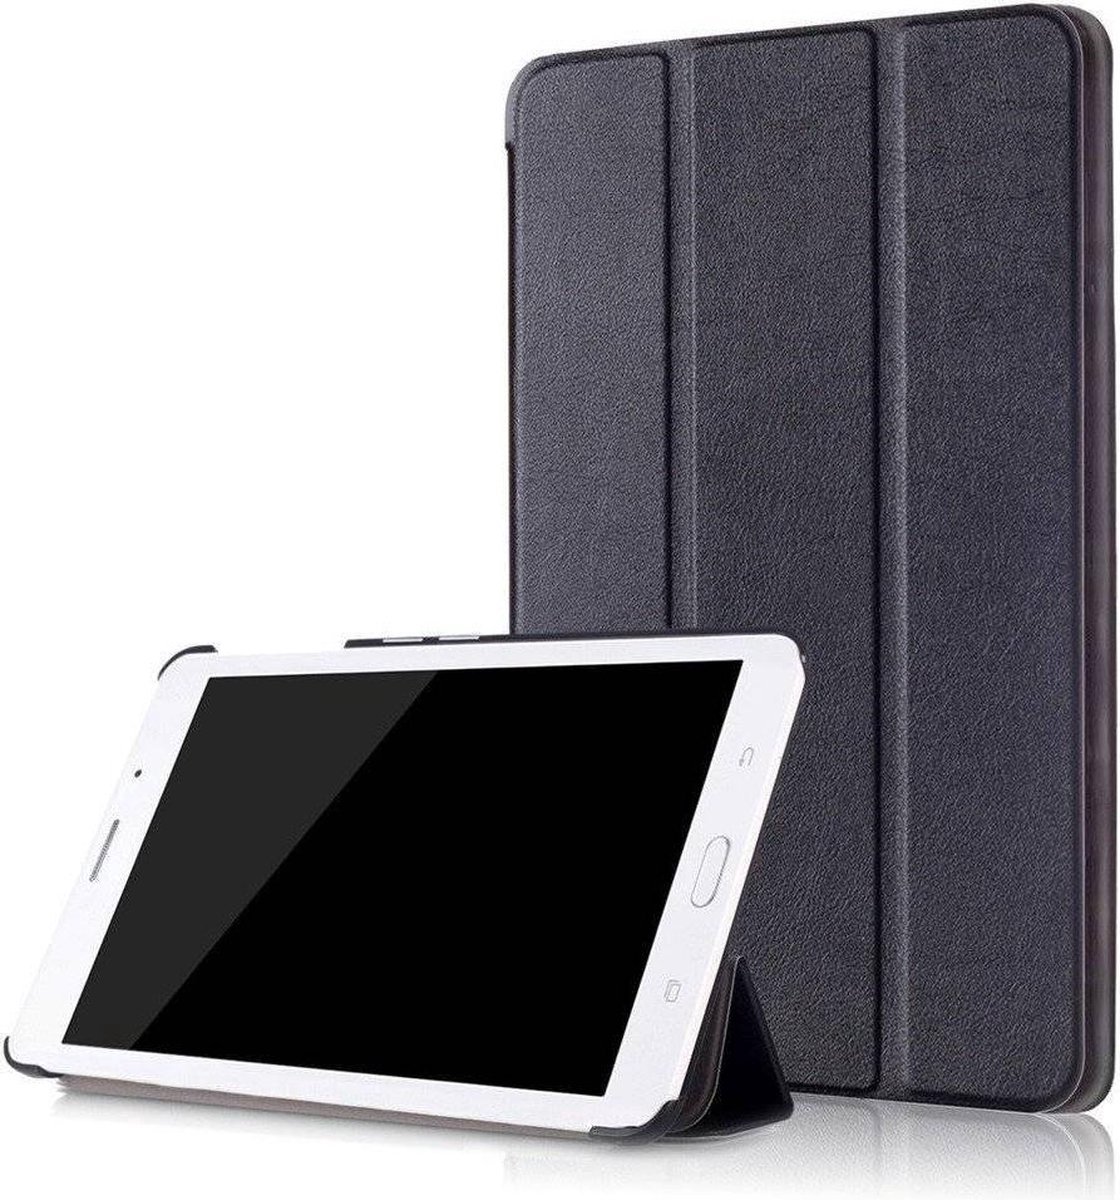 Samsung Tab A 10.1 Inch Hoes Zwart Hoesje - Tri Fold Tablet Case - Smart Cover- Magnetische Sluiting - Samsung Galaxy Tab A